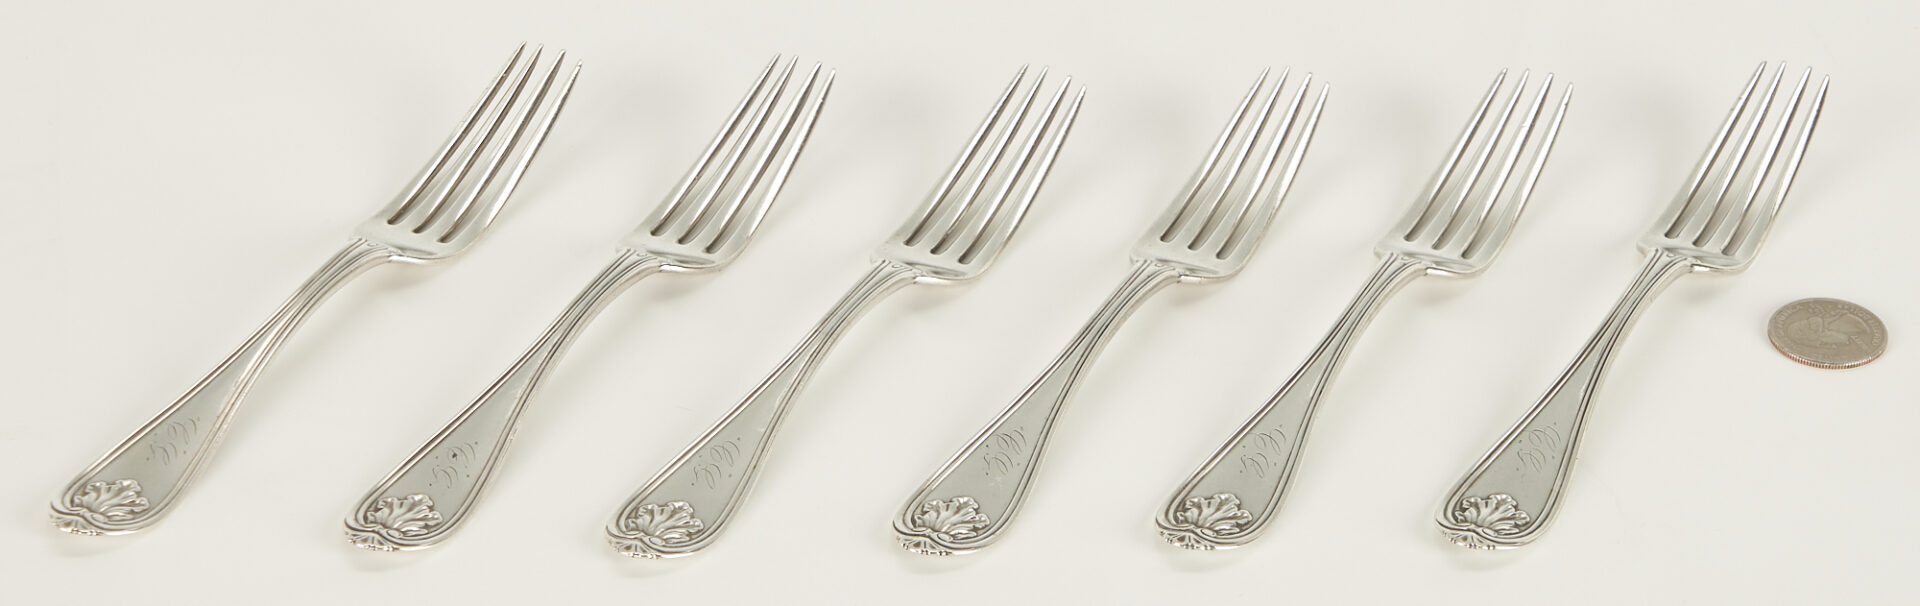 Lot 87: Six Mississippi Coin Silver Forks, Klein & Brother